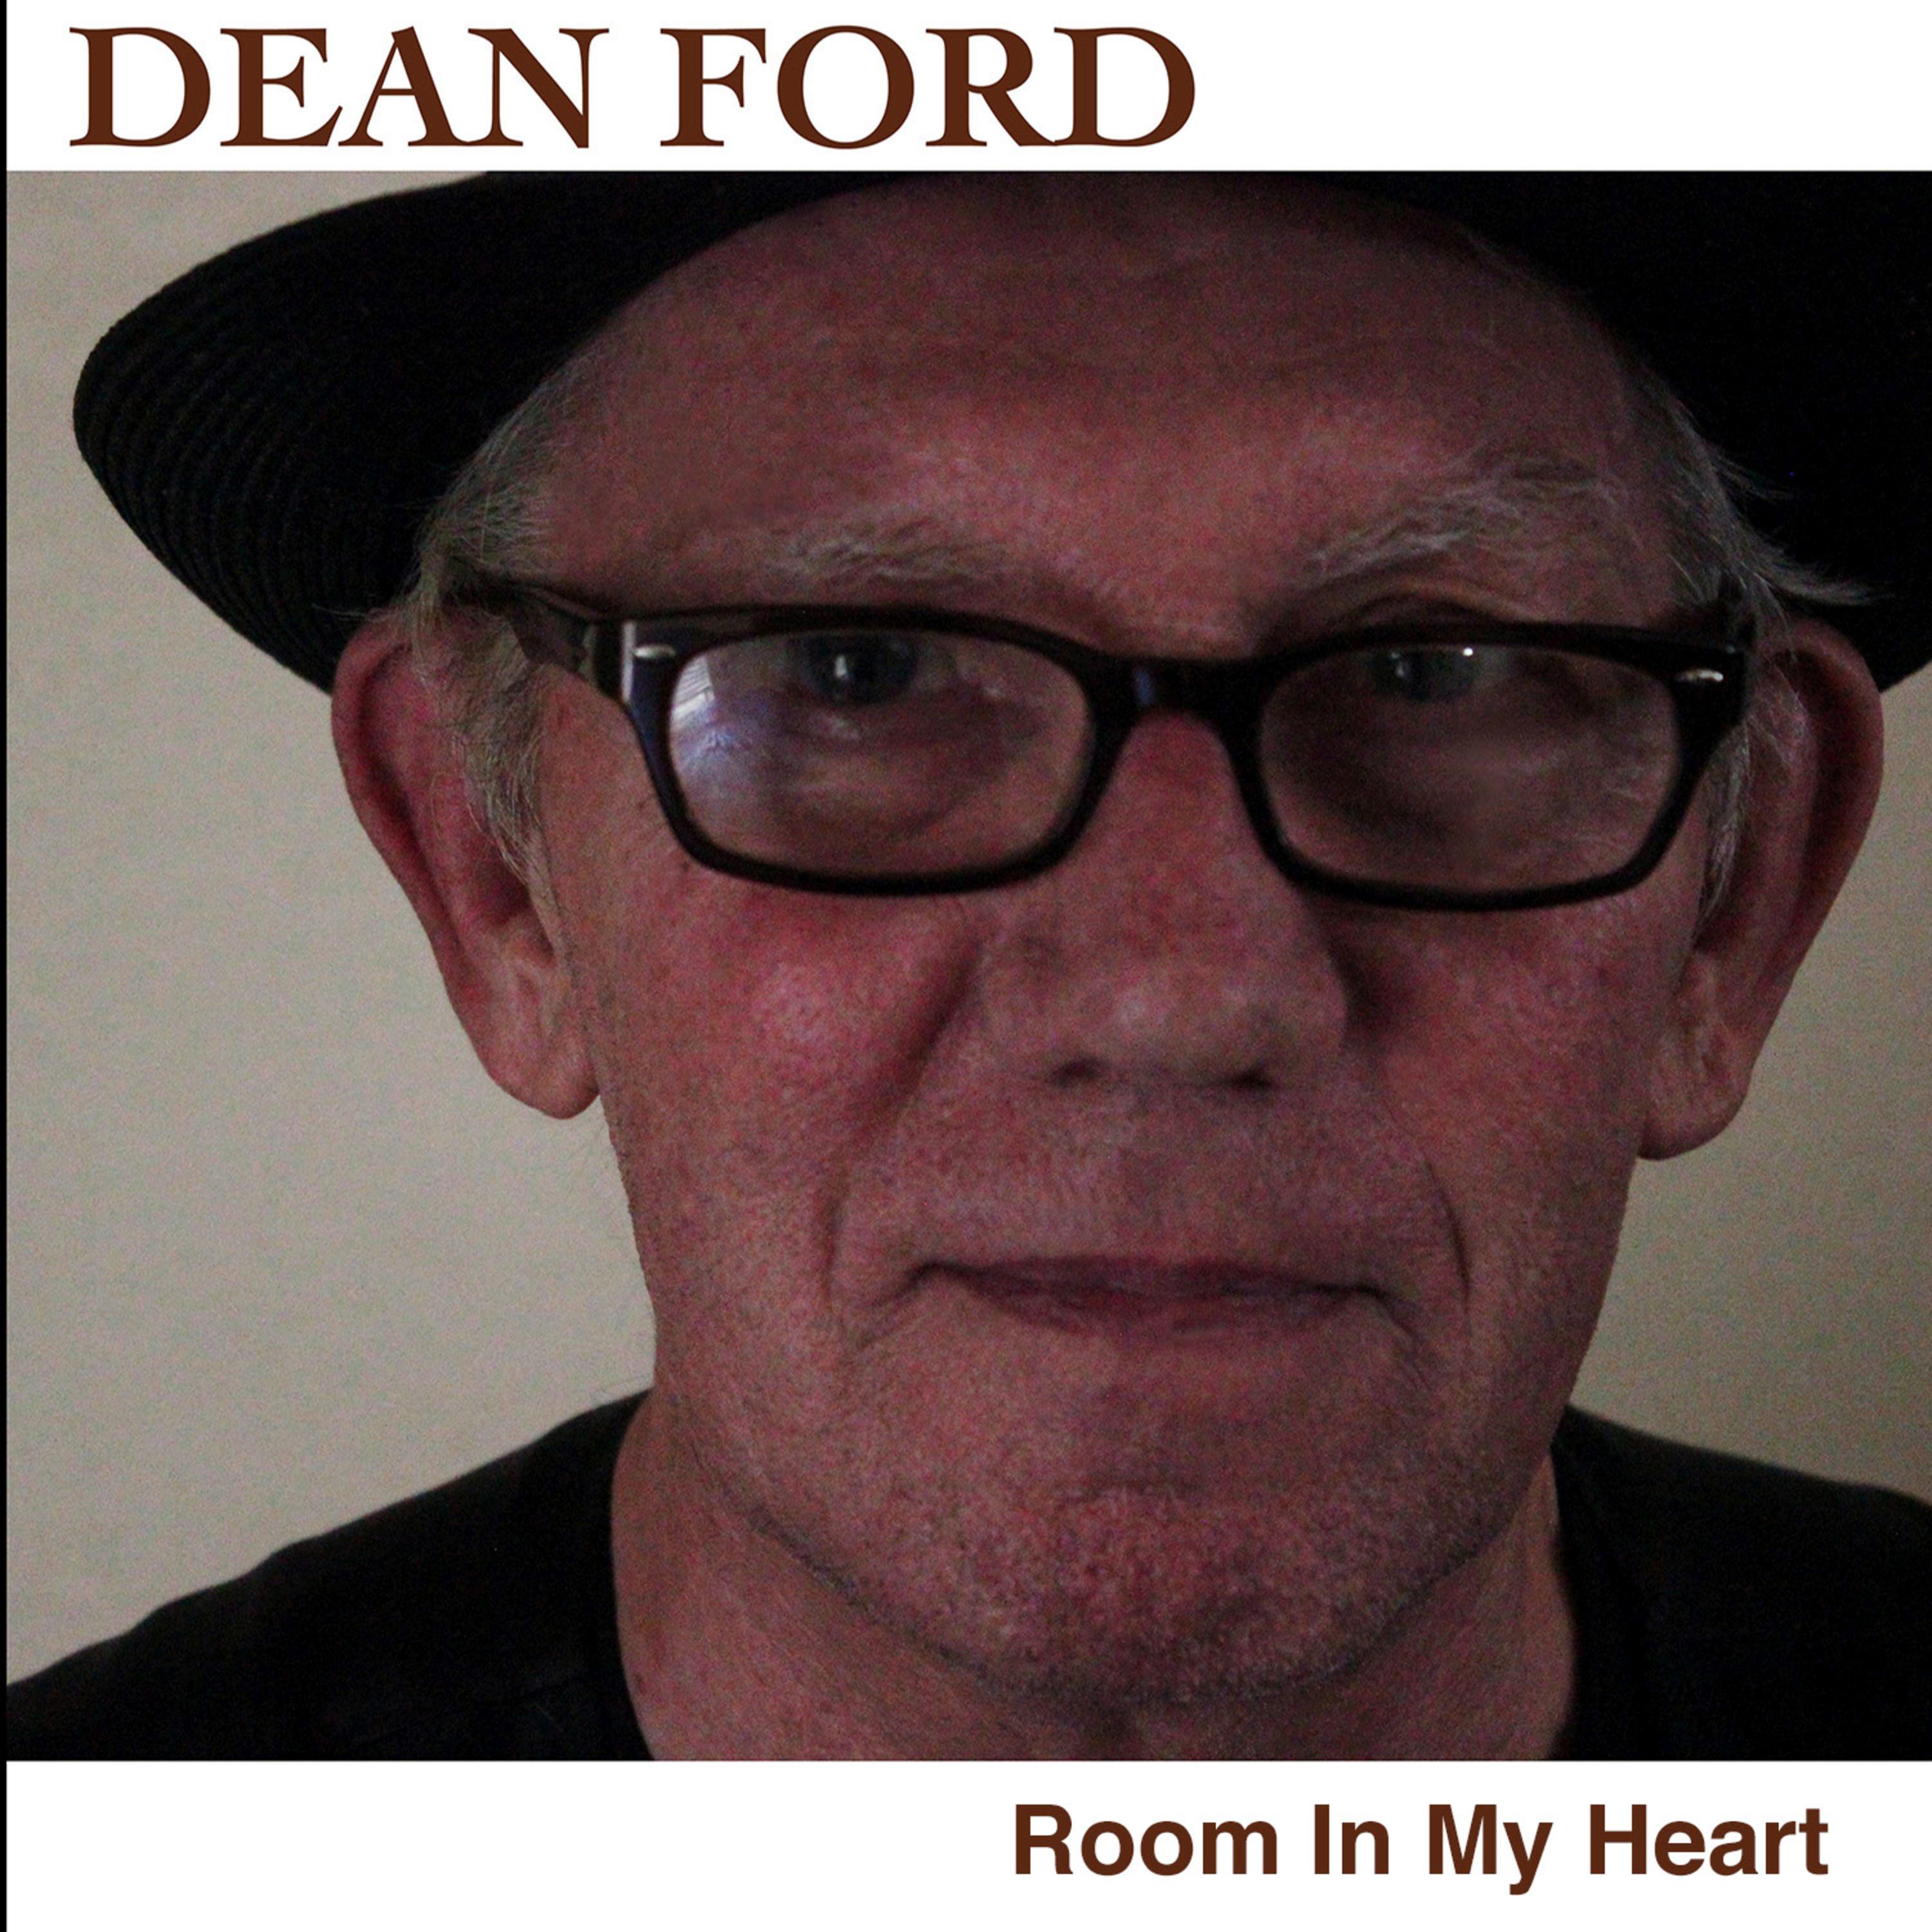 Room in My Heart by Dean Ford